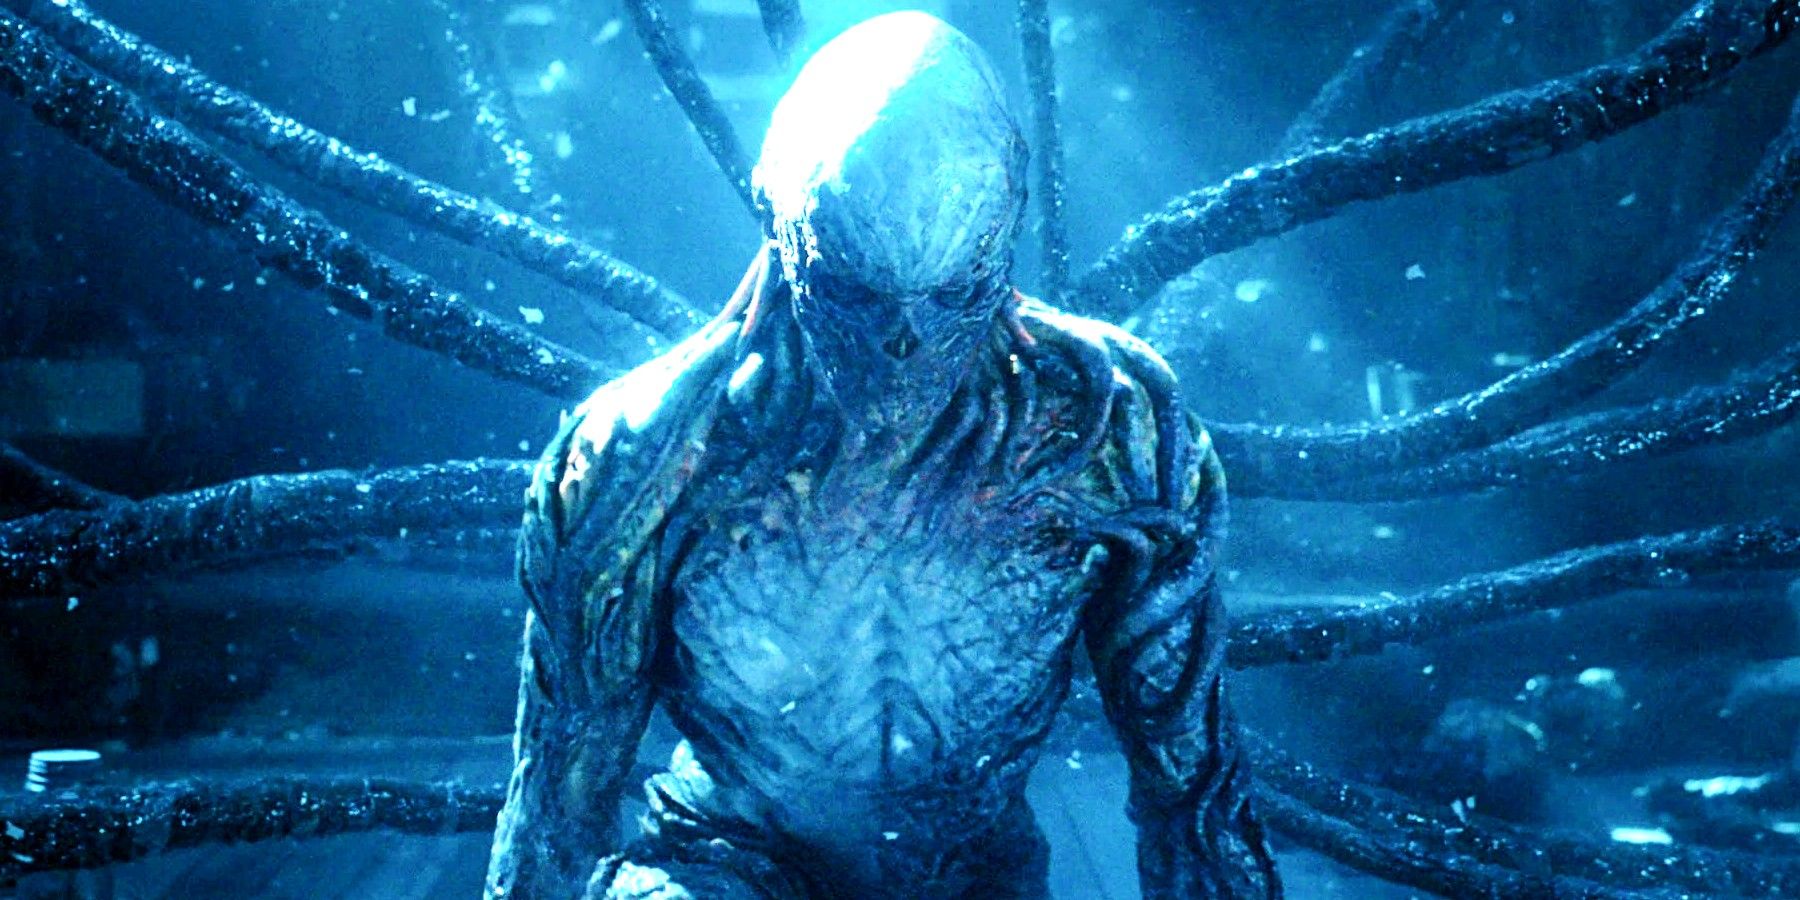 Stranger Things Season 4’s Vecna vs. Mind Flayer: Differences Explained